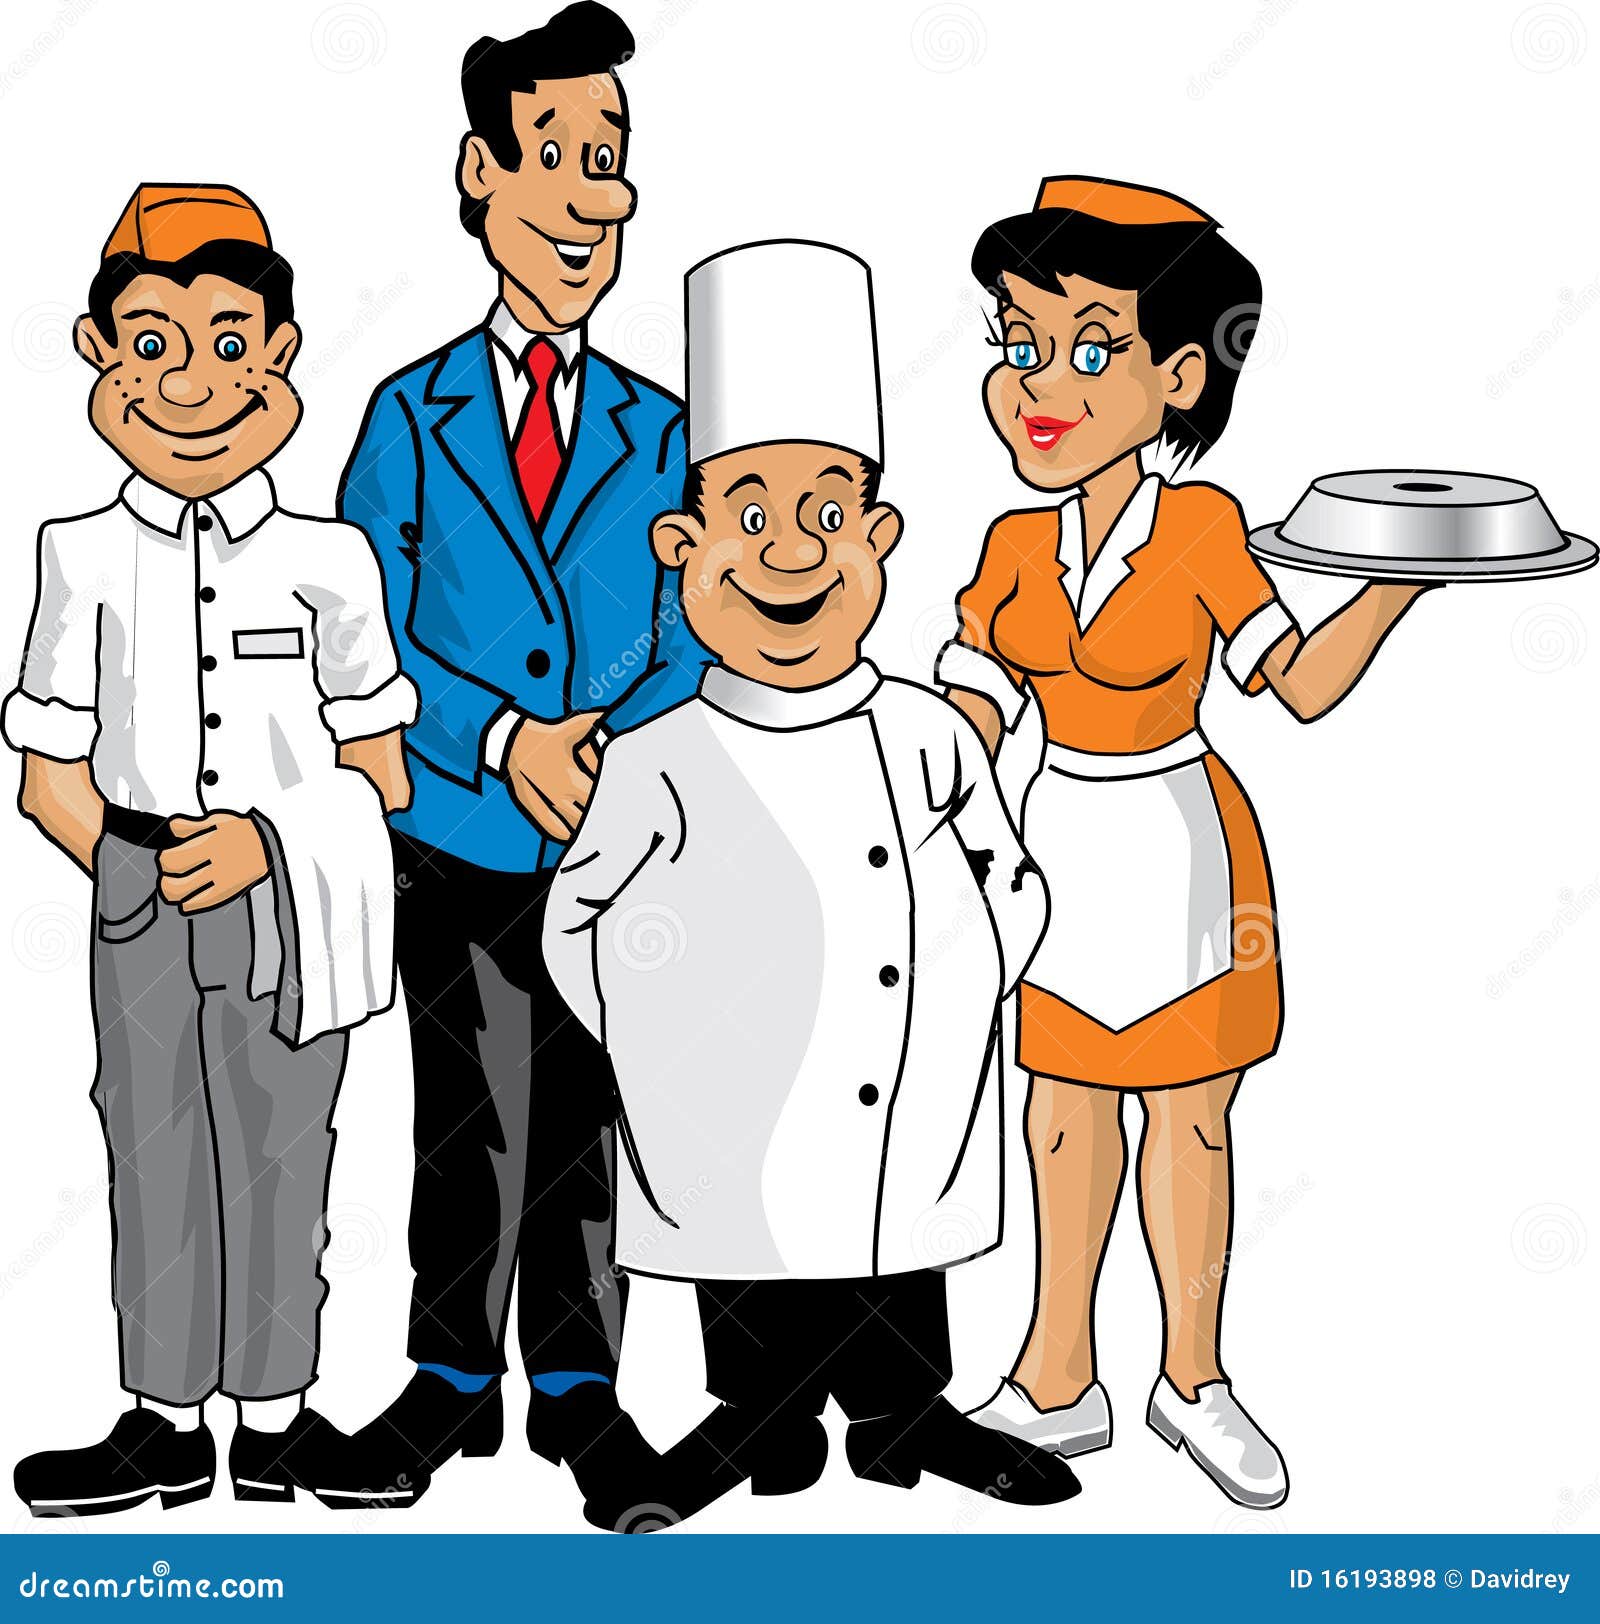 restaurant workers clipart - photo #1